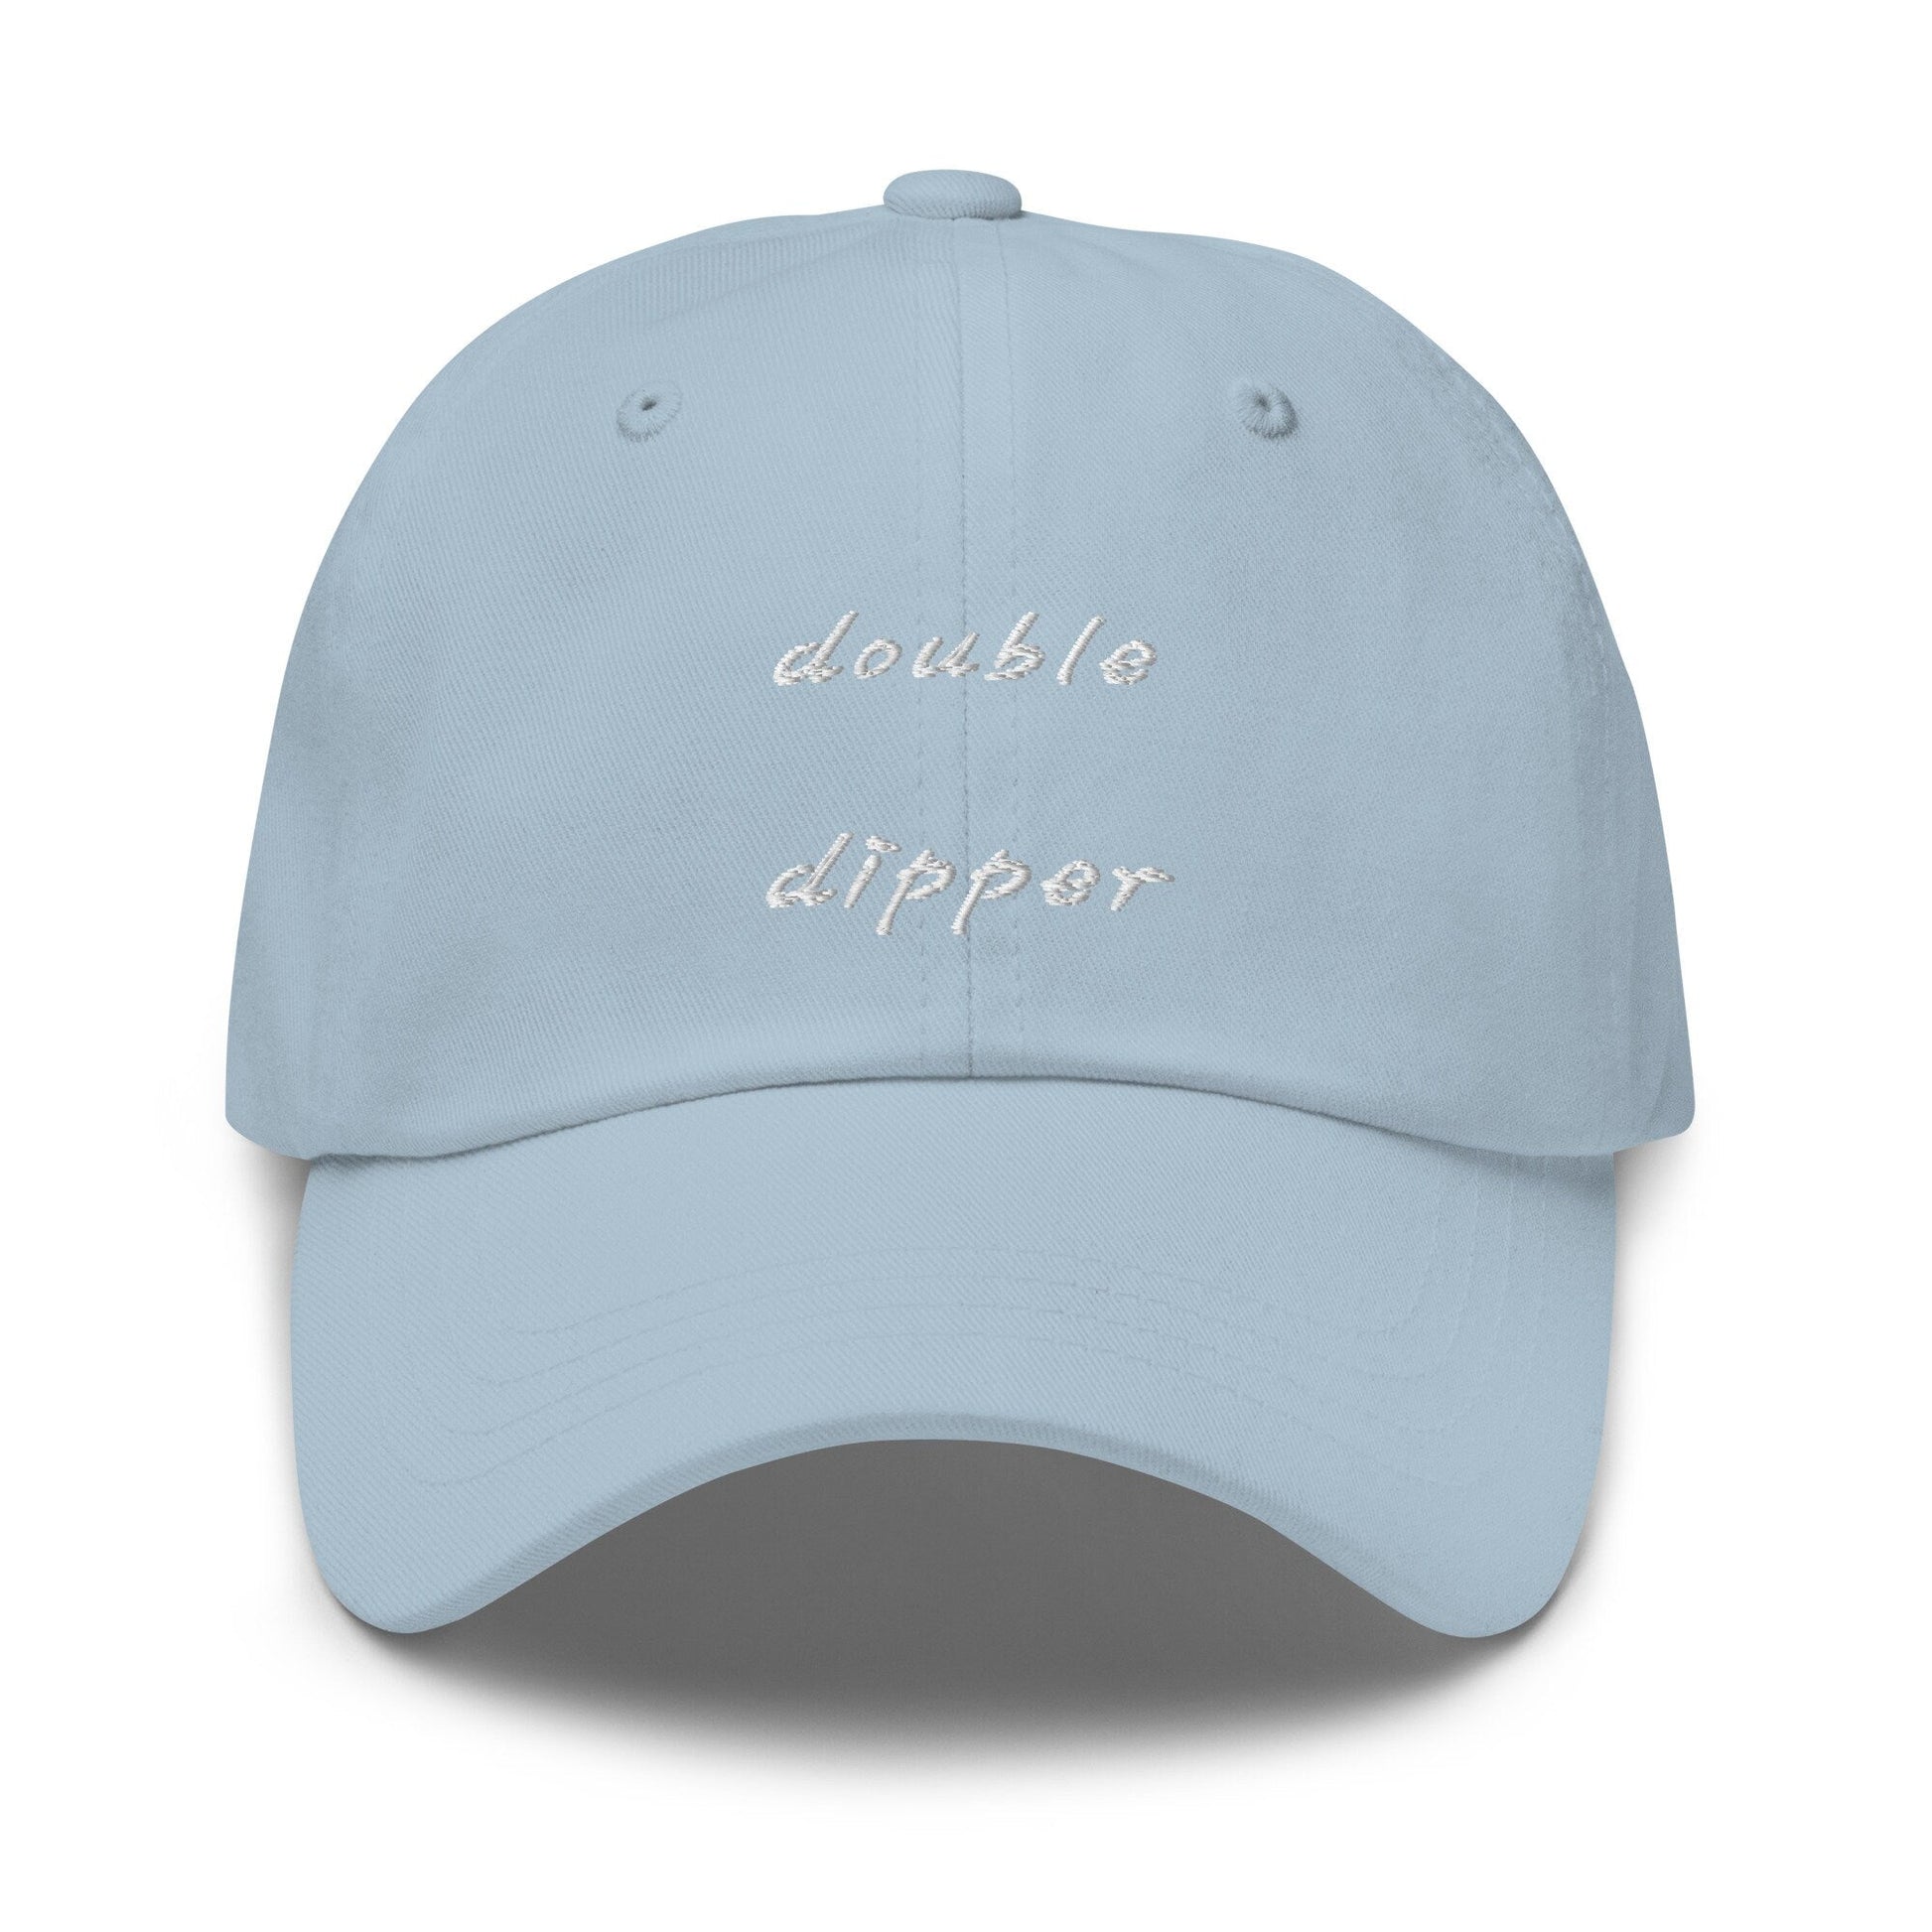 Double Dipper Hat - For Sauce Lovers, and Risk Takers - Faux Pas - Cotton Embroidered Baseball Cap - Evilwater Originals